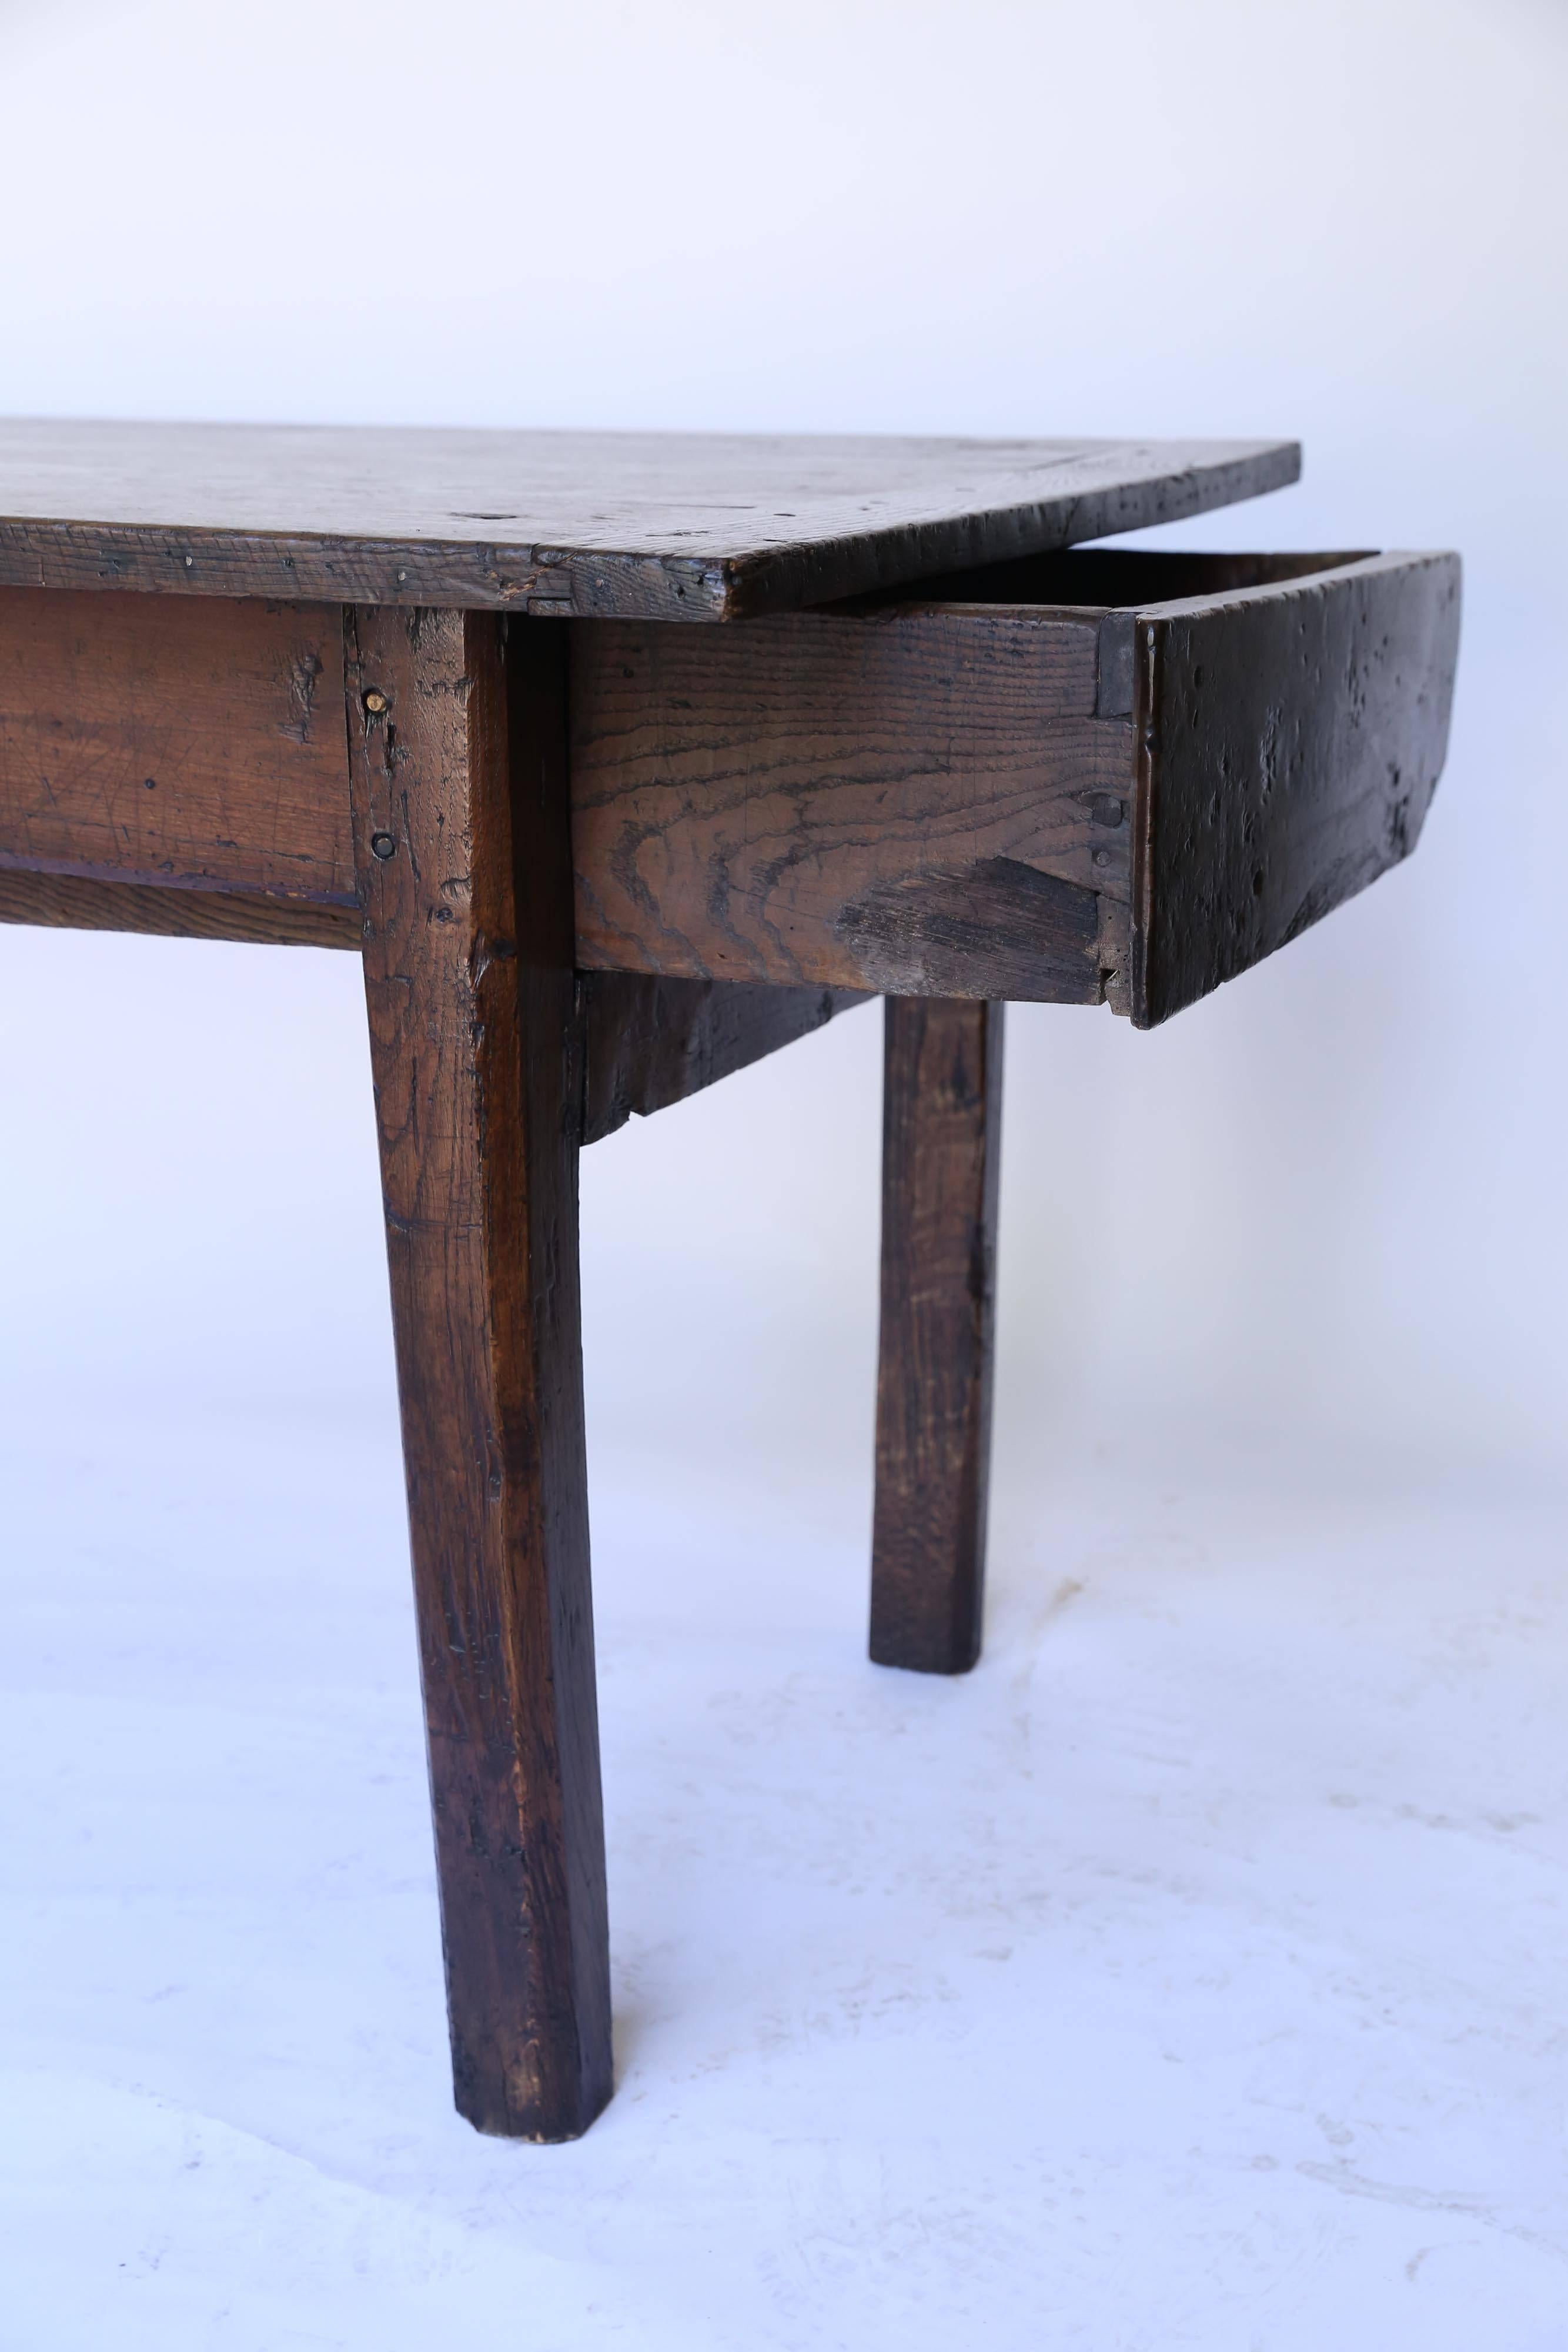 Made by hand, Circa 1820, an old farm table from France with two drawers. The drawers measure 20 inches wide by 22 inches long by 5.25 inches deep. Wonderful dark patina.